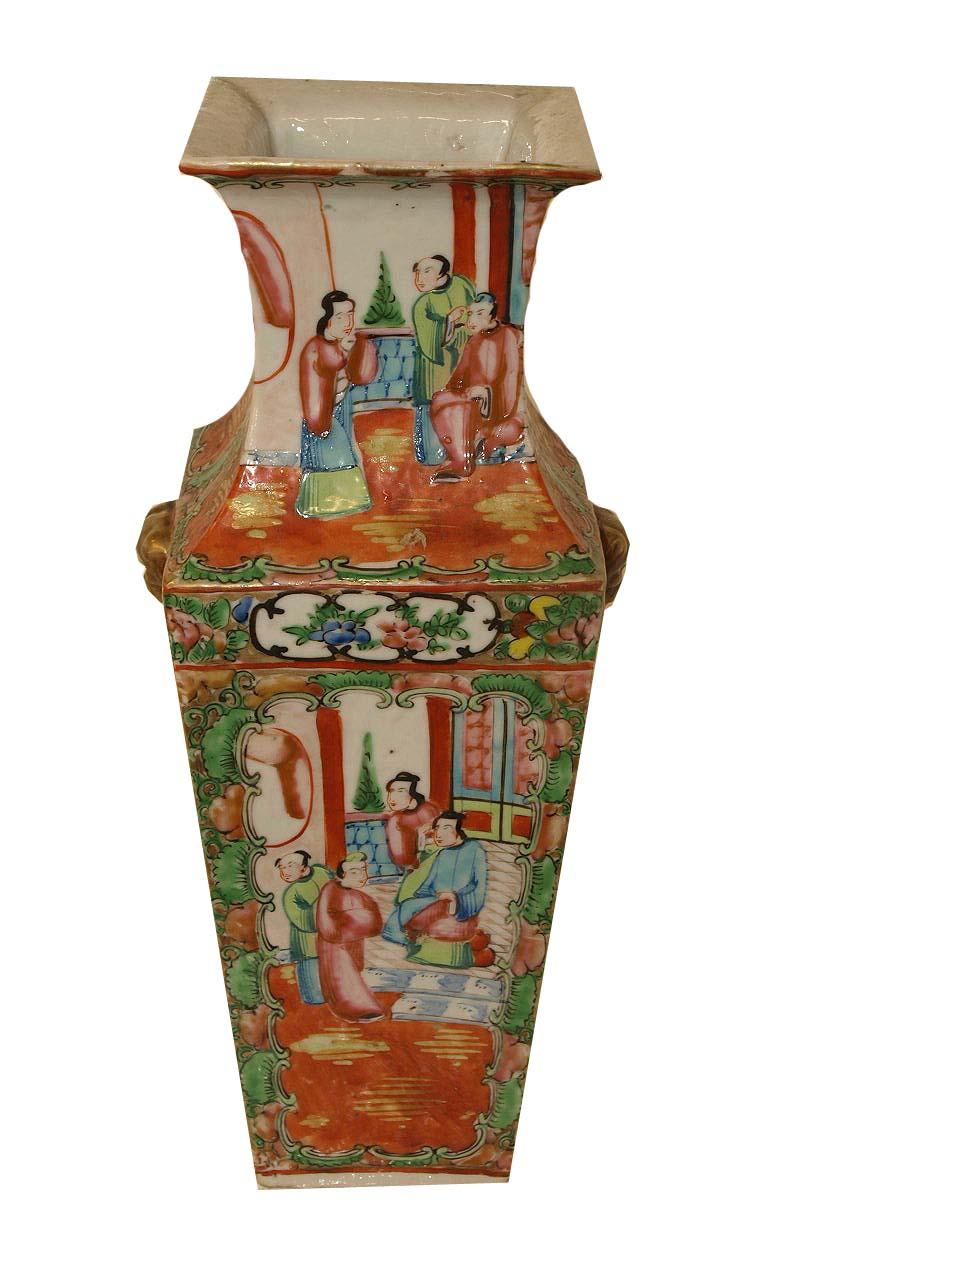 Chinese famile rose vase, with alternating scenes of flowers and birds( foo dogs holding rings) and groups of women, the diameter at the top is 3.88' and at the bottom is 2.88''.